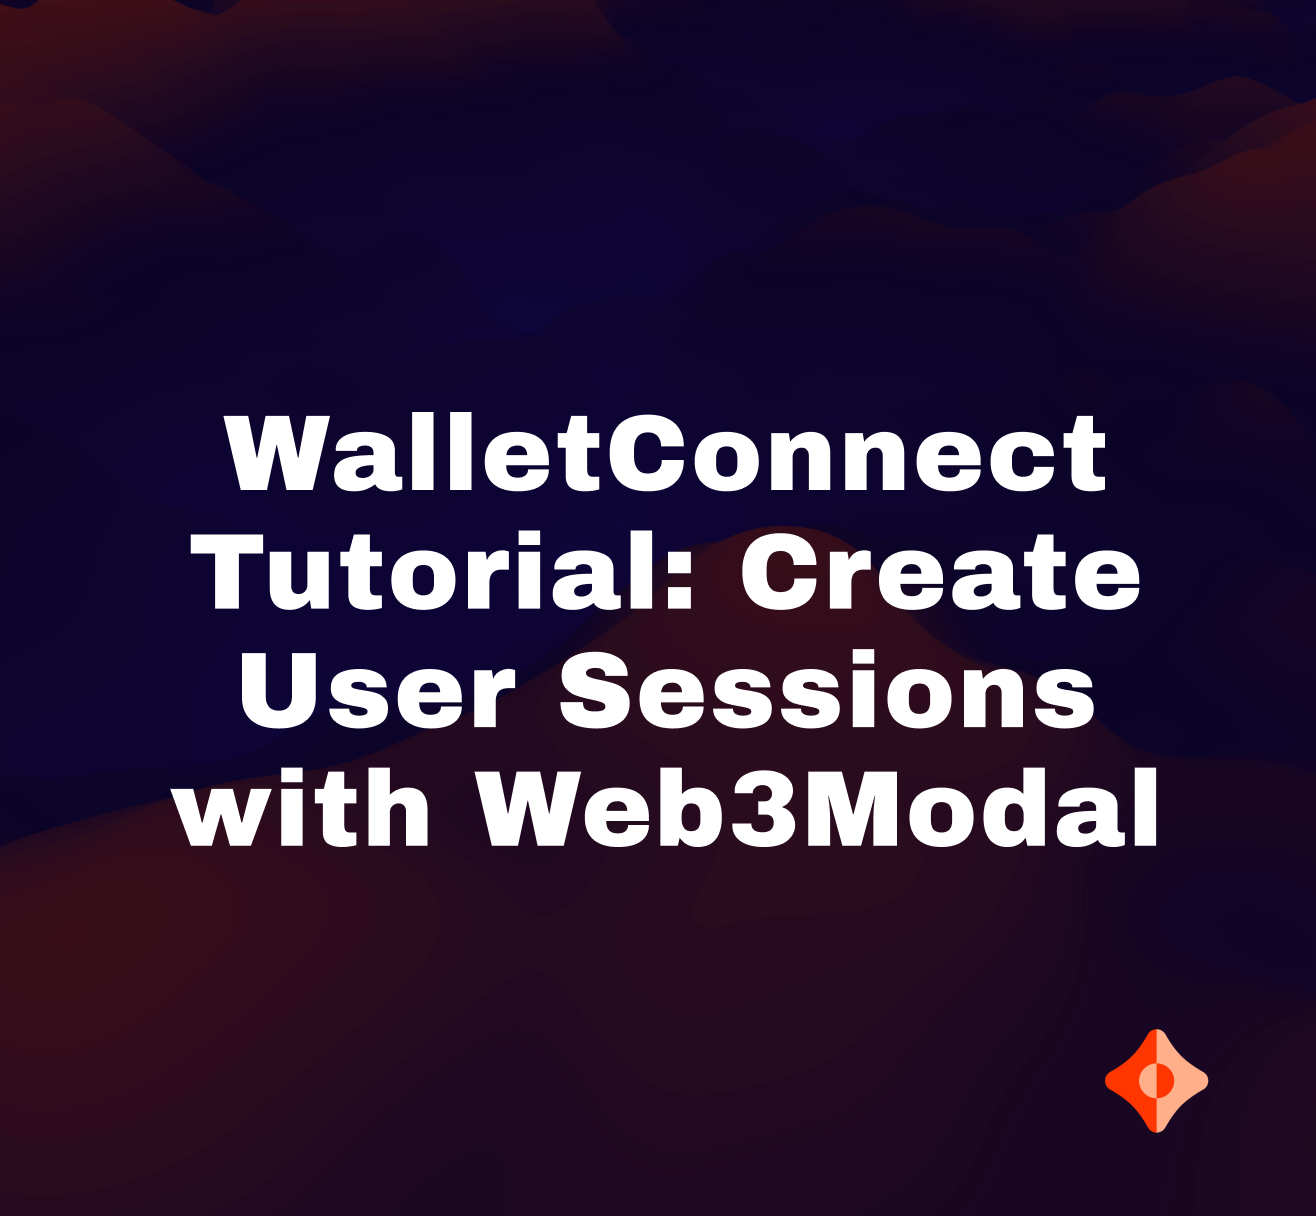 WalletConnect Tutorial: Create User Sessions with Web3Modal